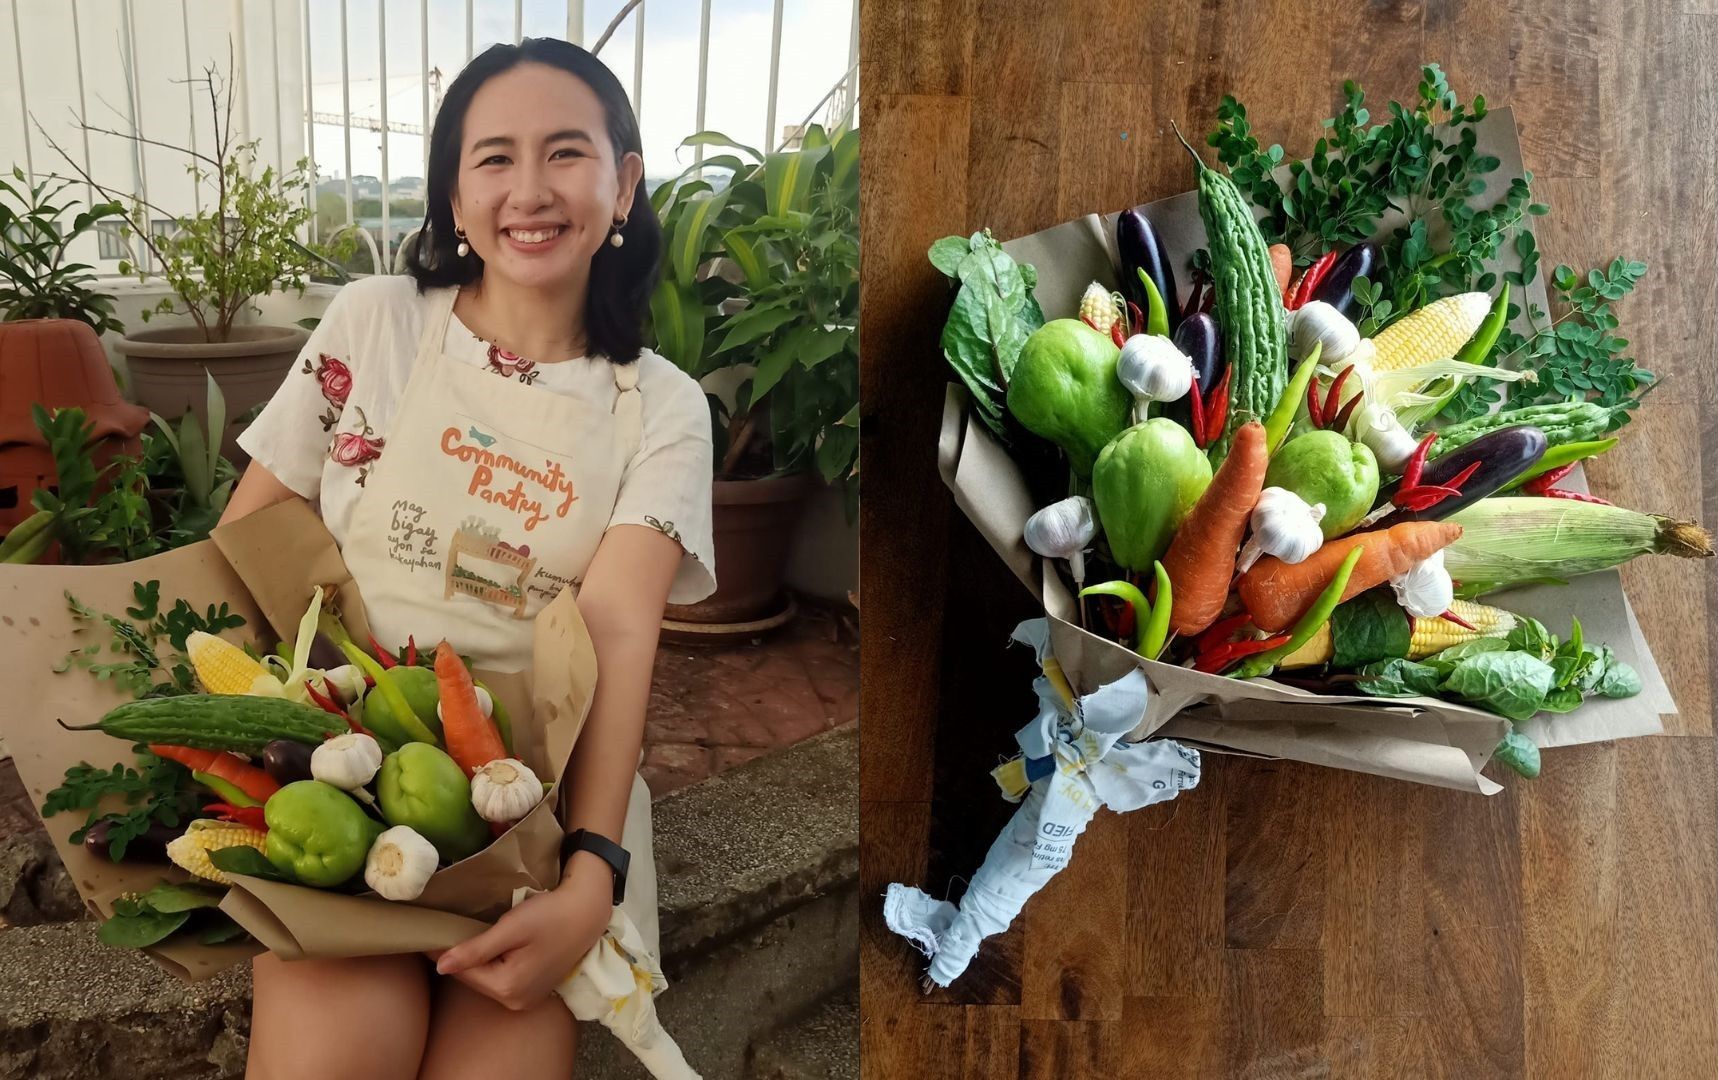 Community pantry founder Patreng Non helping sell 'gulay bouquets' for Valentine's Day